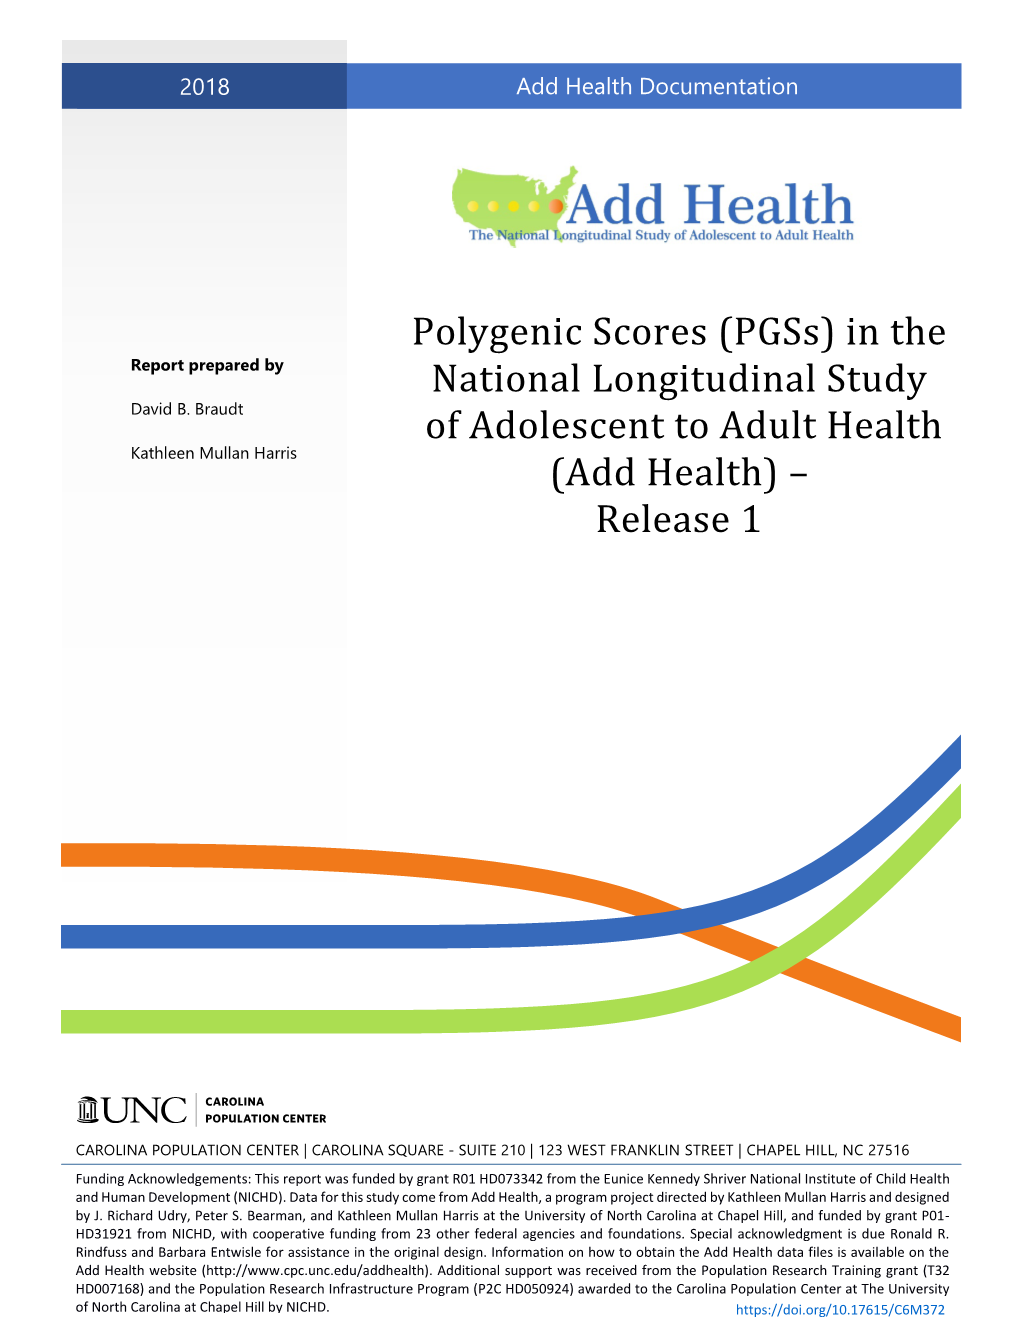 Polygenic Scores (Pgss) in the National Longitudinal Study Of